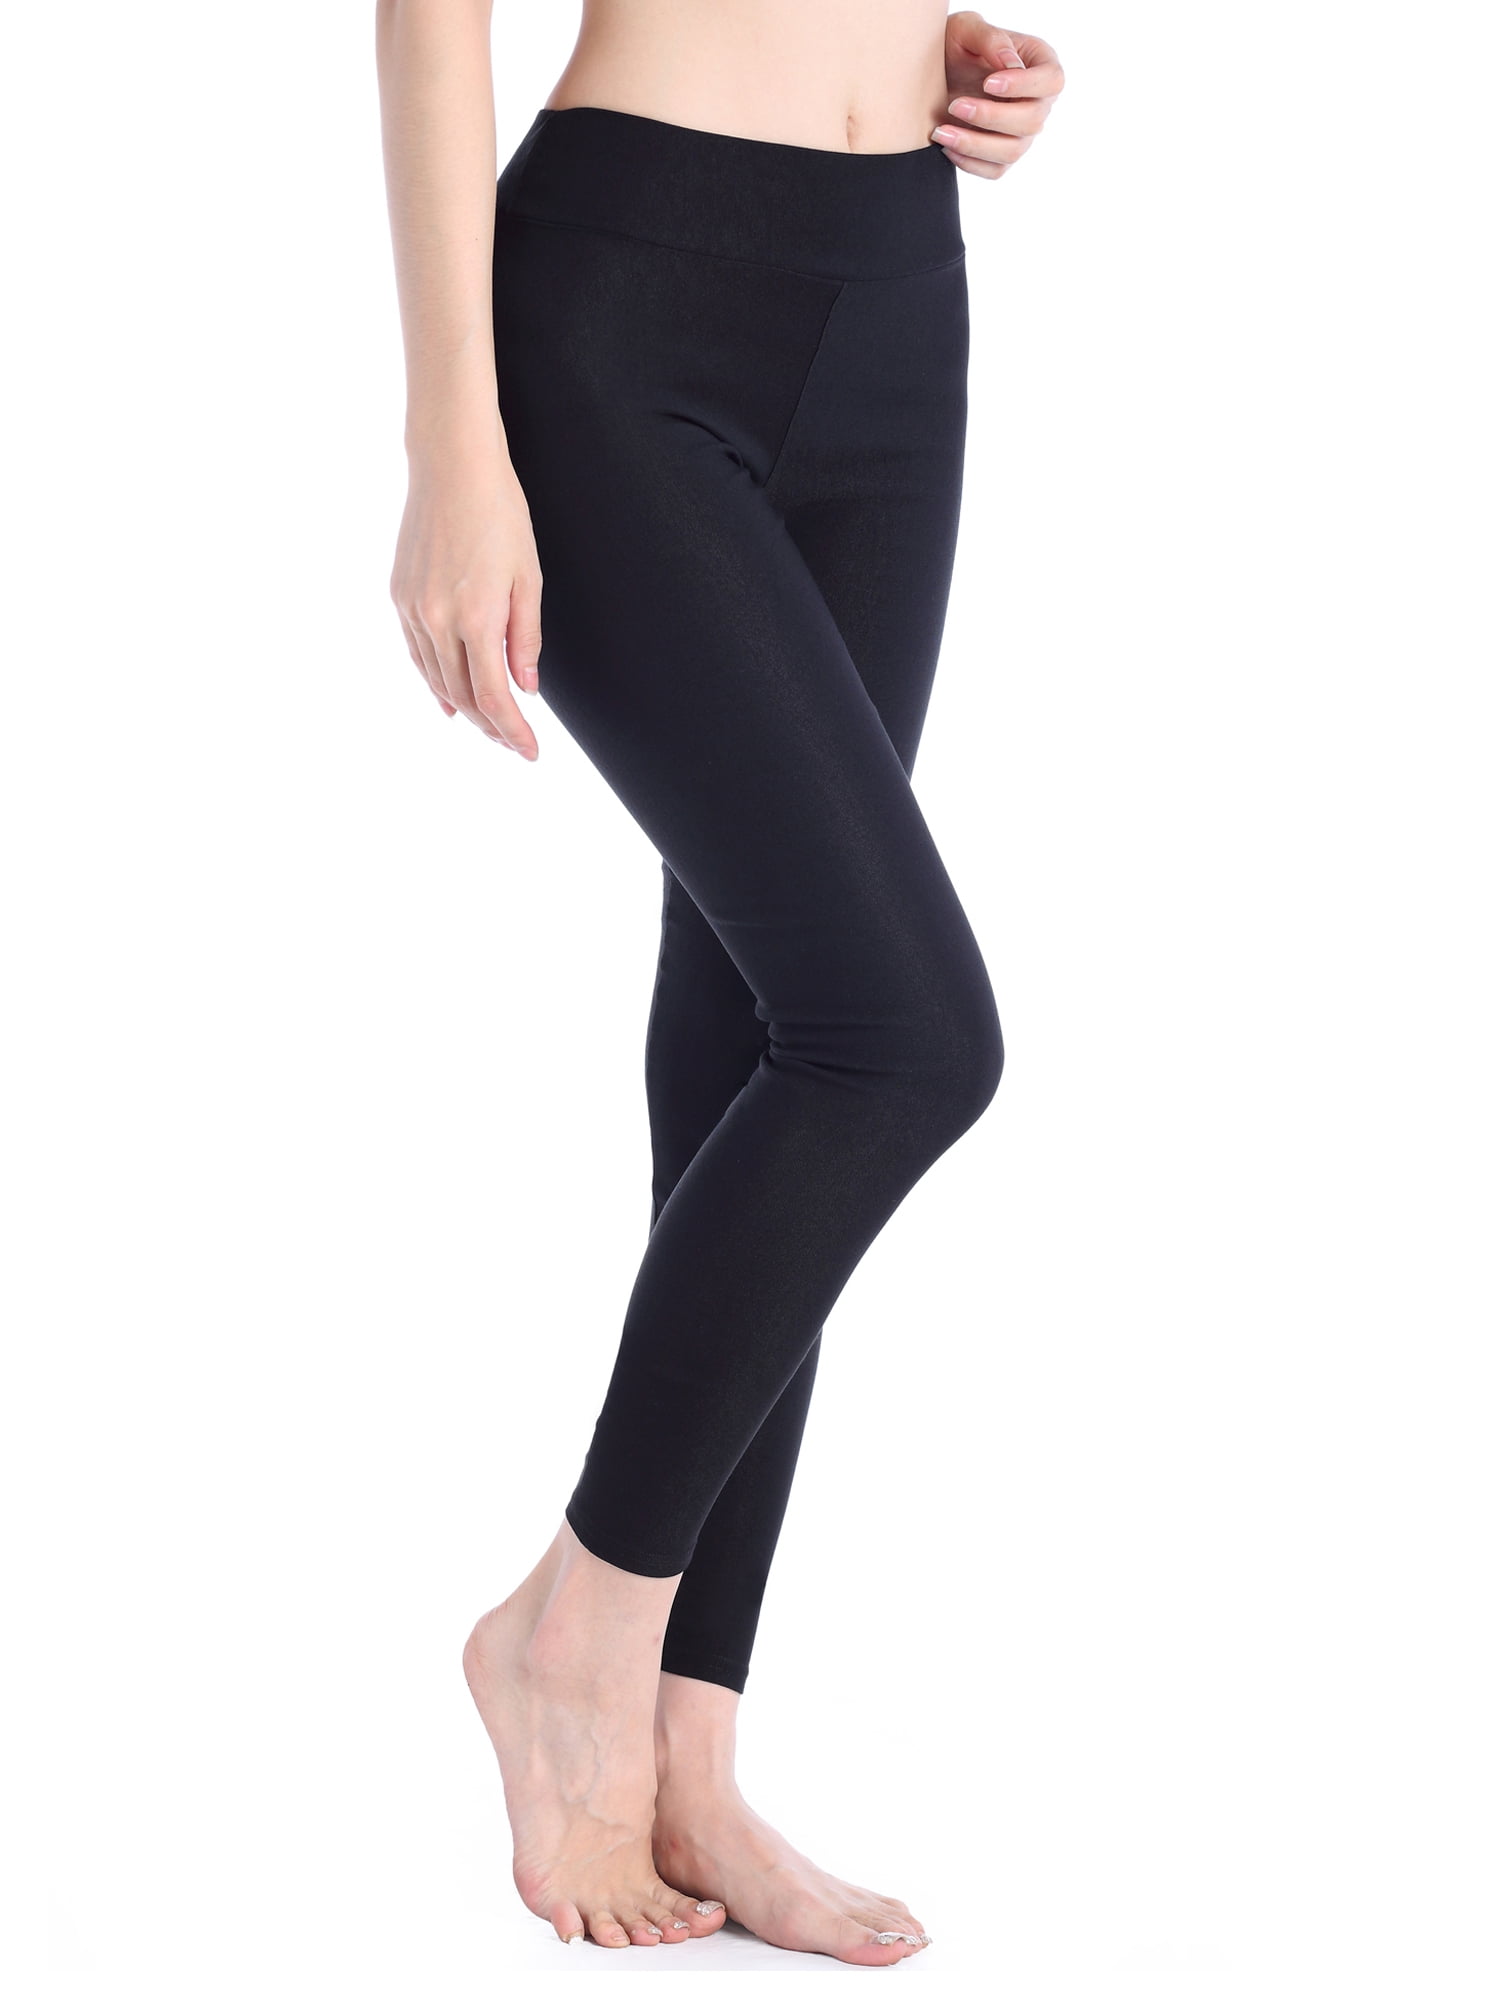 Youloveit Women's Plus Size Solid Color Seamless Leggings Fitness